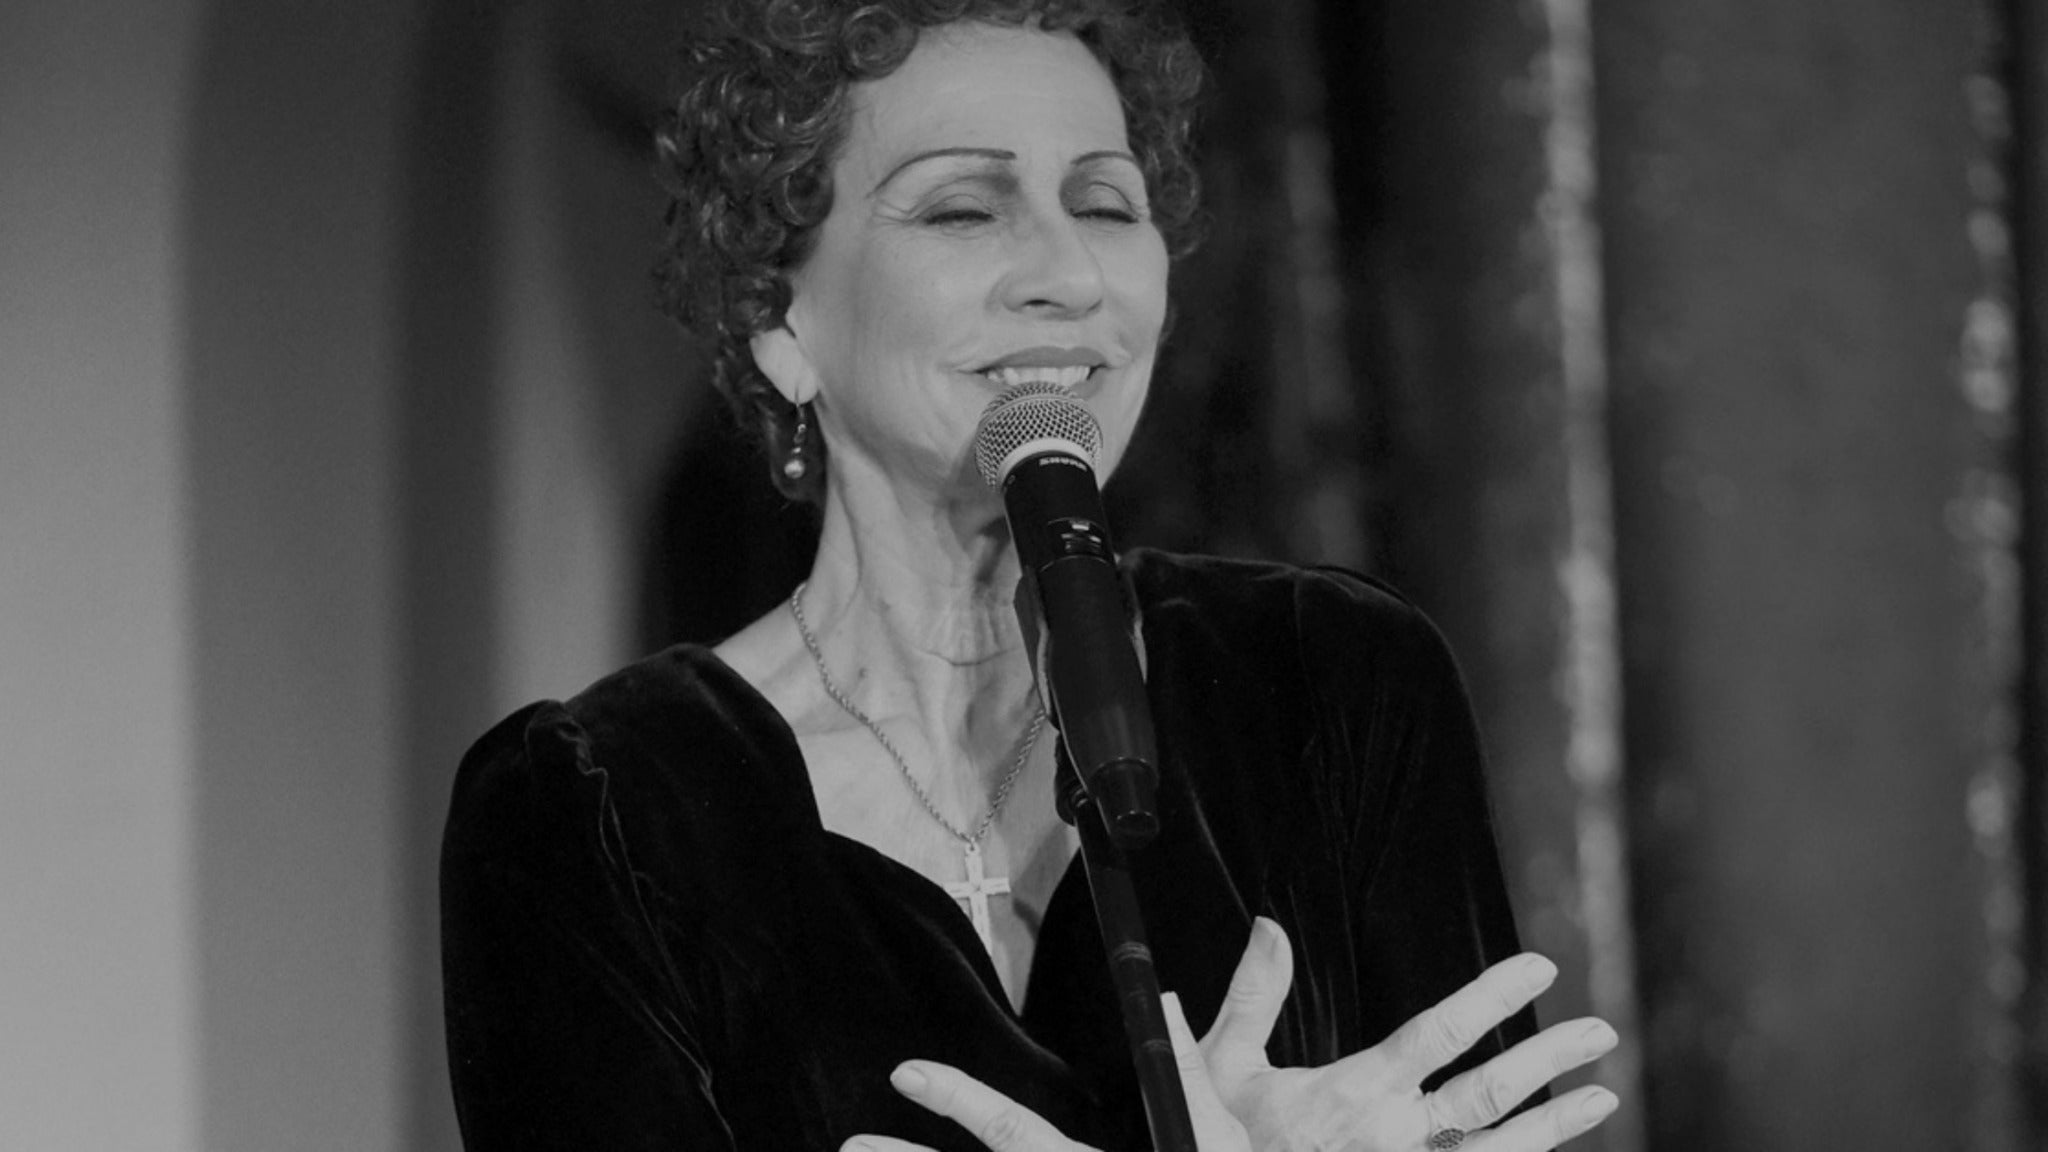 Image used with permission from Ticketmaster | Edith Piaf : Ma vie en rose et noir tickets